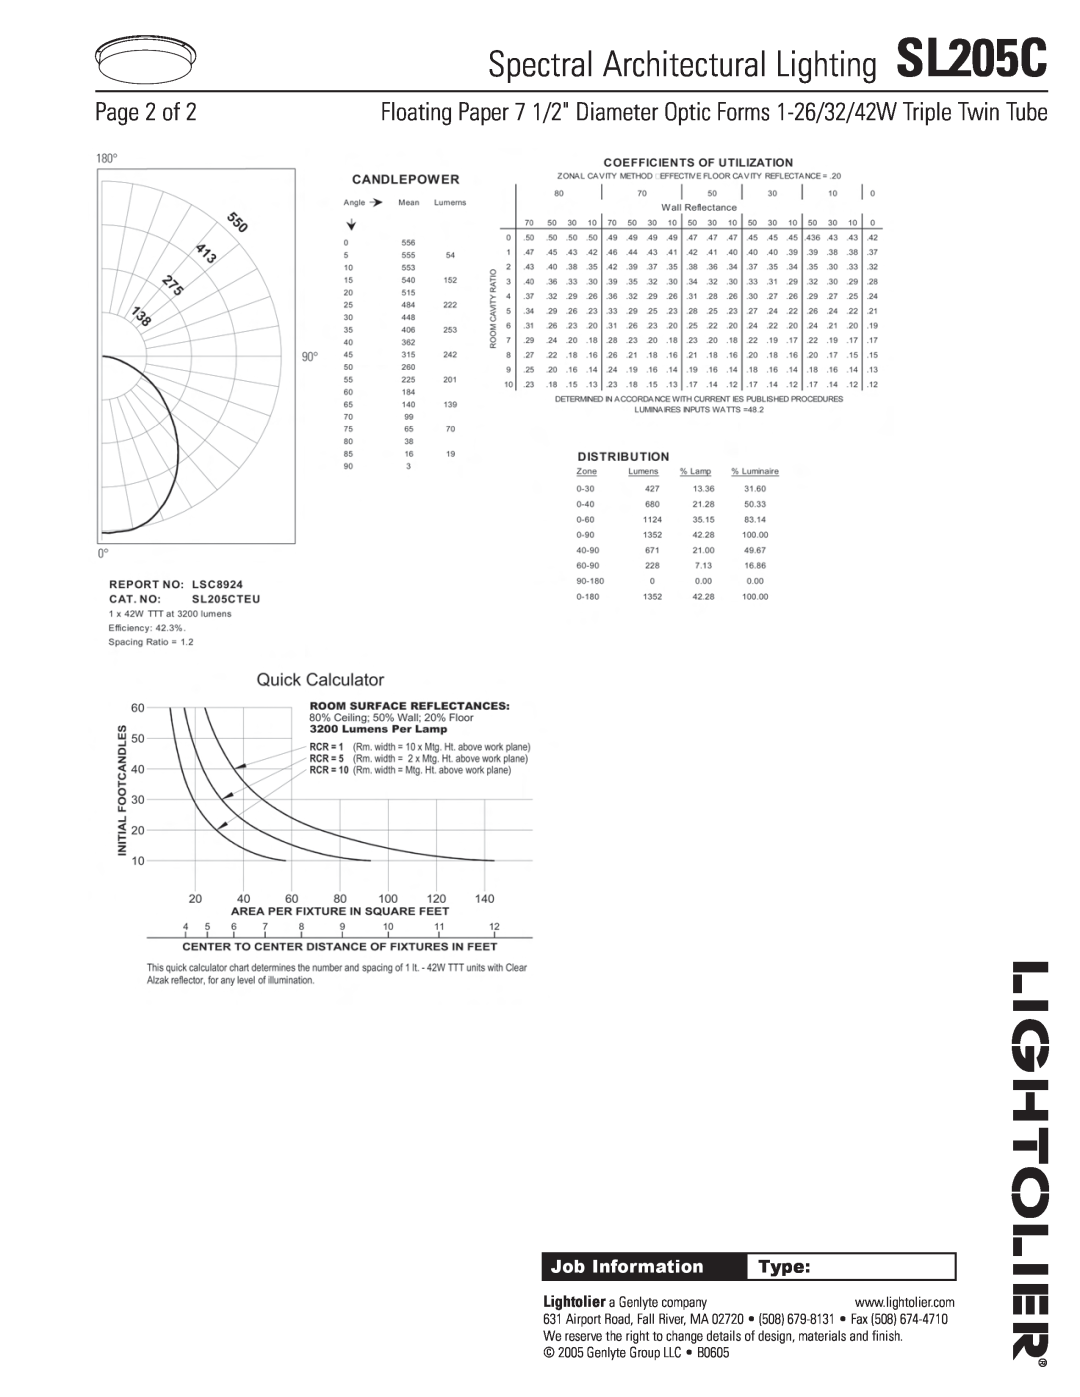 Lightolier manual Page 2 of, Spectral Architectural Lighting SL205C, Job Information, Type 